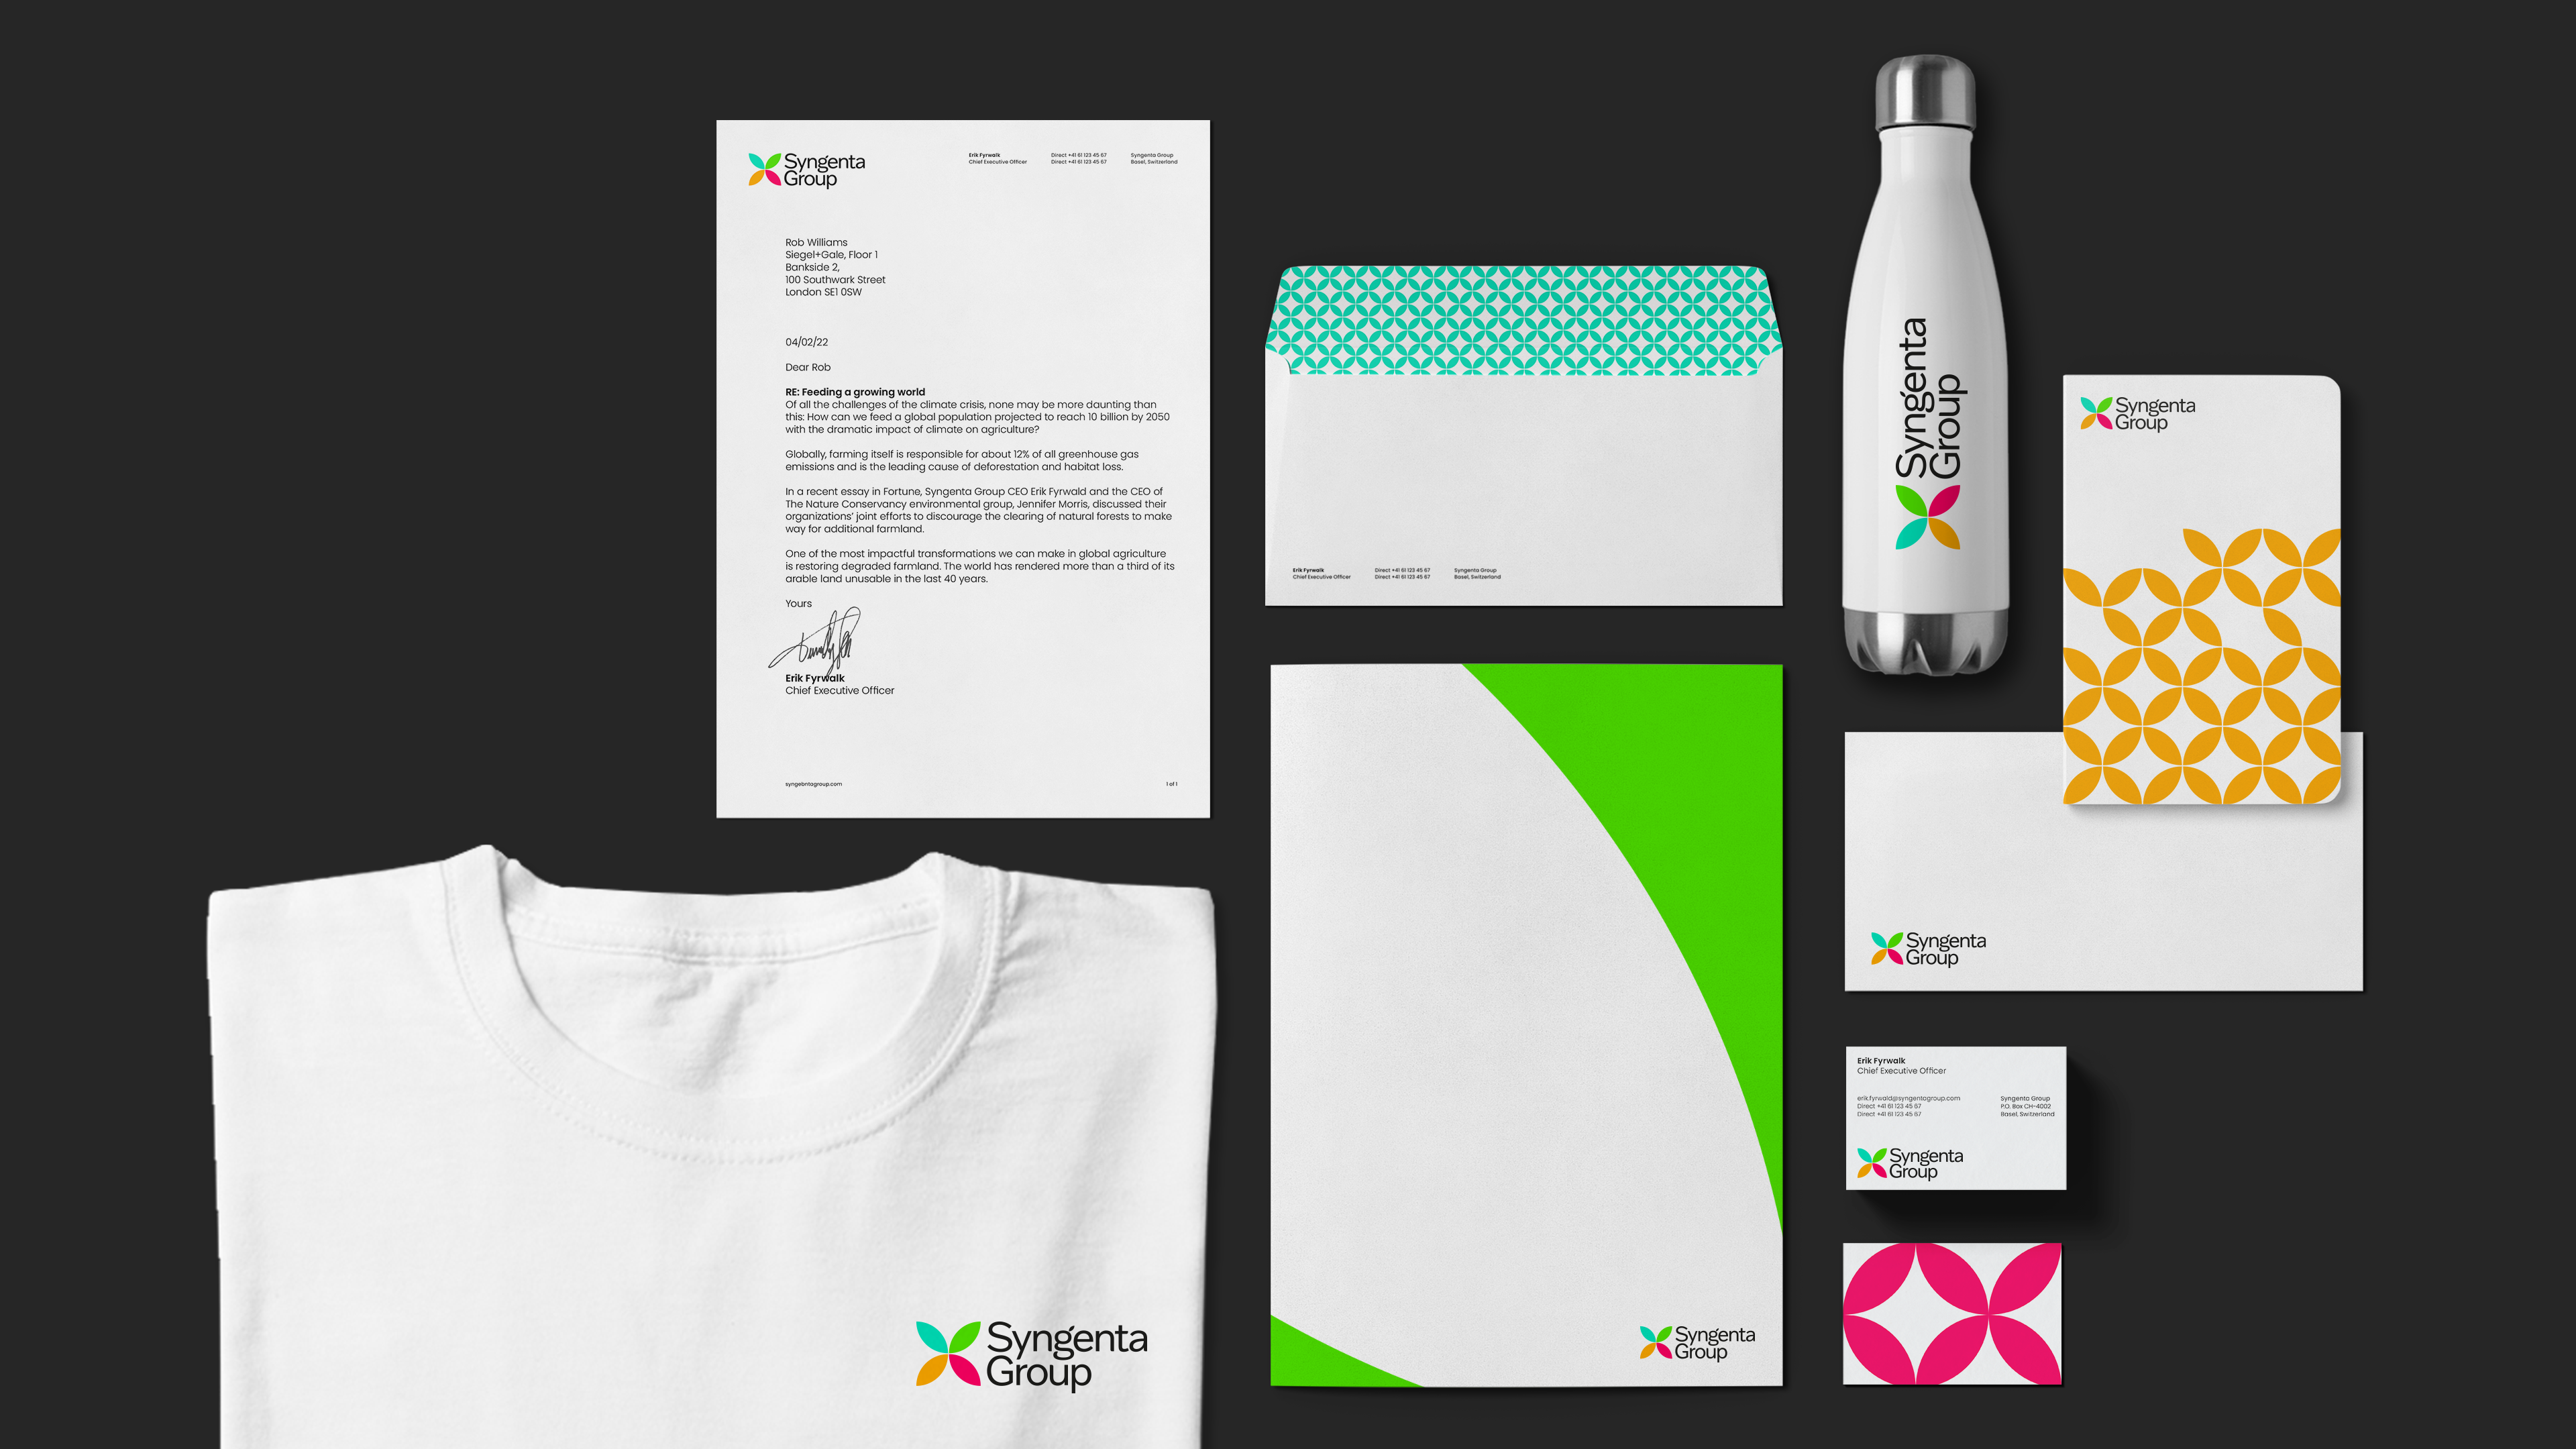 Syngenta Group’s modern design featured on a T-shirt, water bottle, and stationery